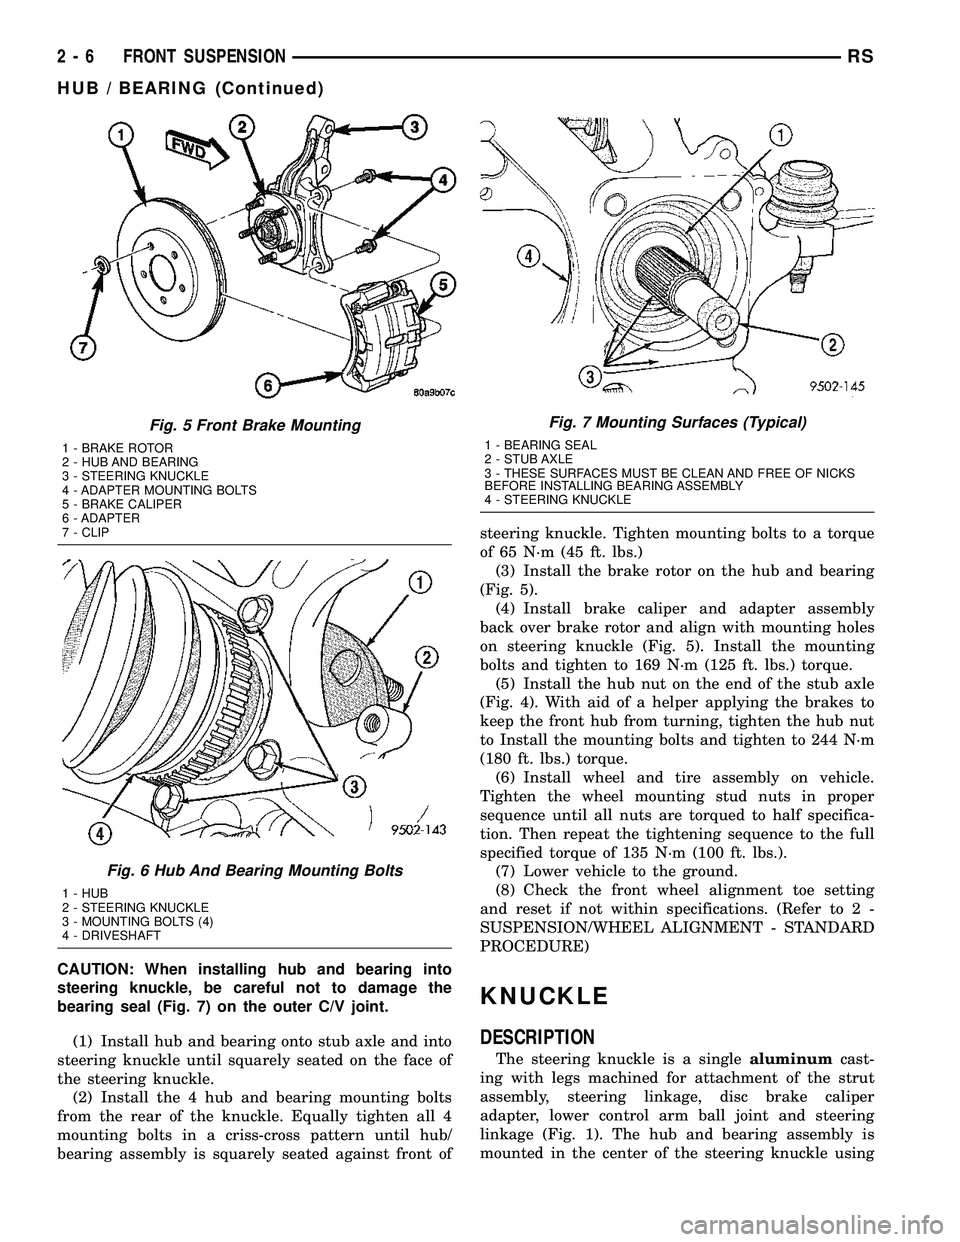 CHRYSLER VOYAGER 2005  Service Manual CAUTION: When installing hub and bearing into
steering knuckle, be careful not to damage the
bearing seal (Fig. 7) on the outer C/V joint.
(1) Install hub and bearing onto stub axle and into
steering 